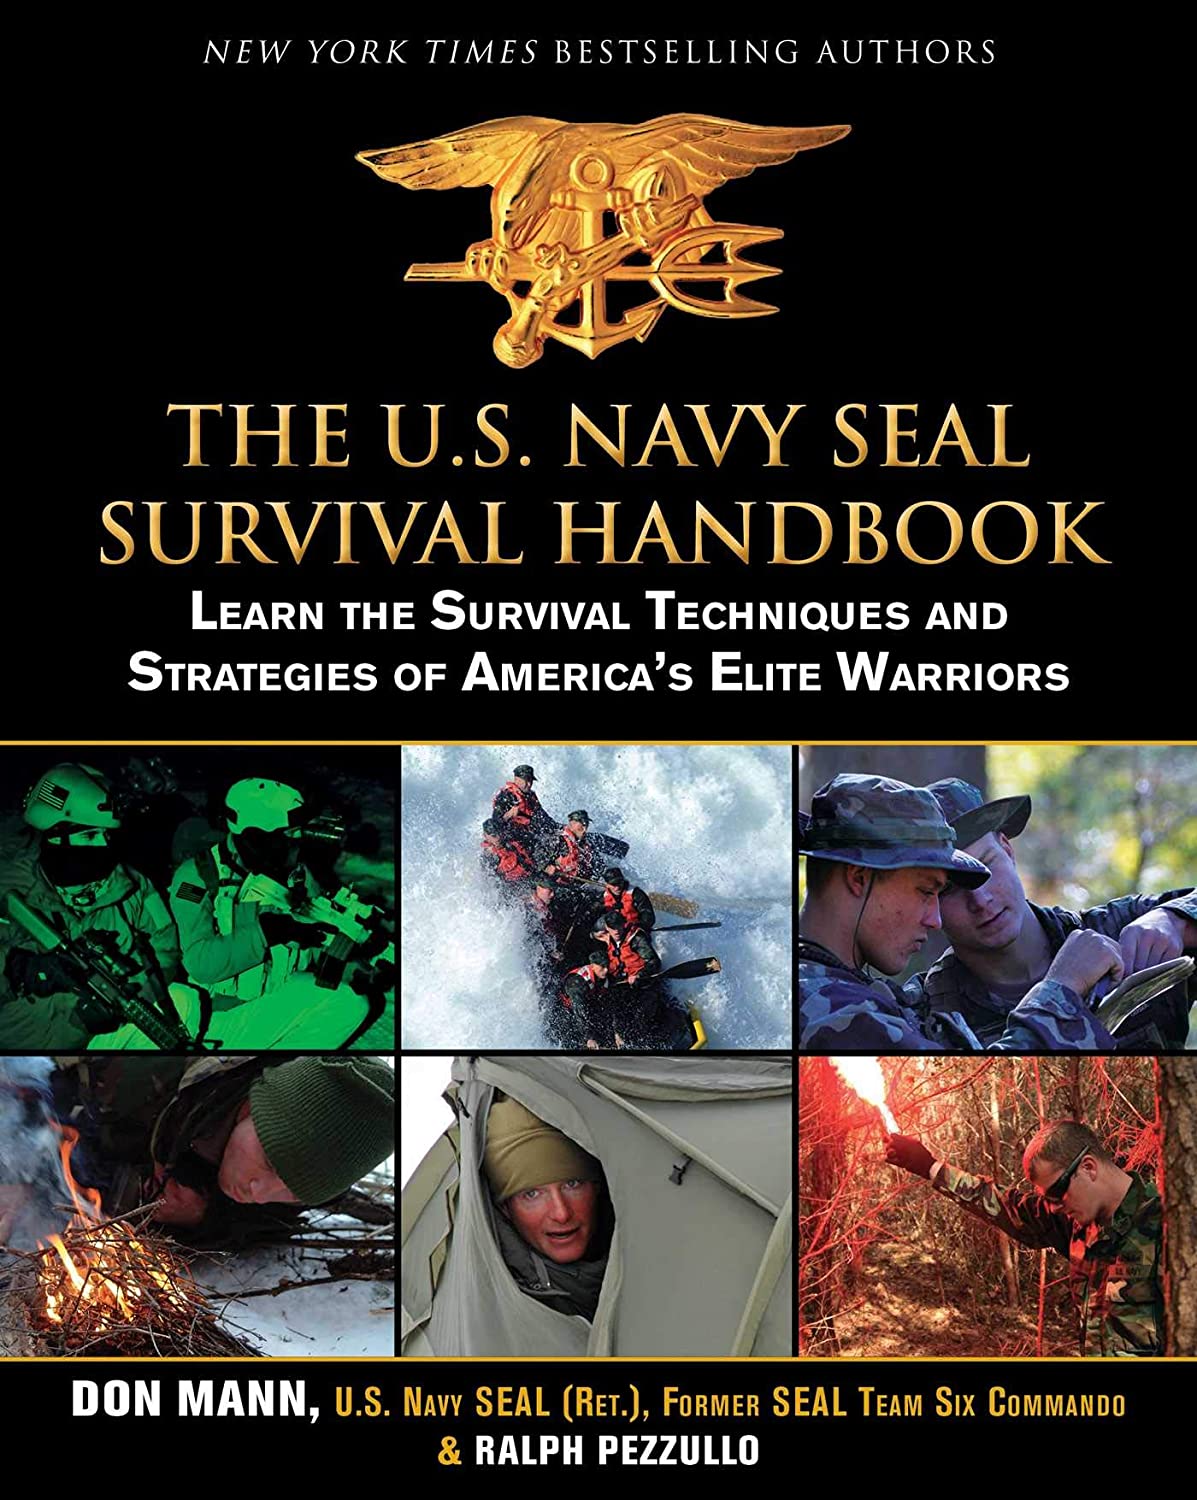 The U.S. Navy SEAL Survival Handbook: Learn the Survival Techniques and Strategies of America’s Elite Warriors (US Army Survival)